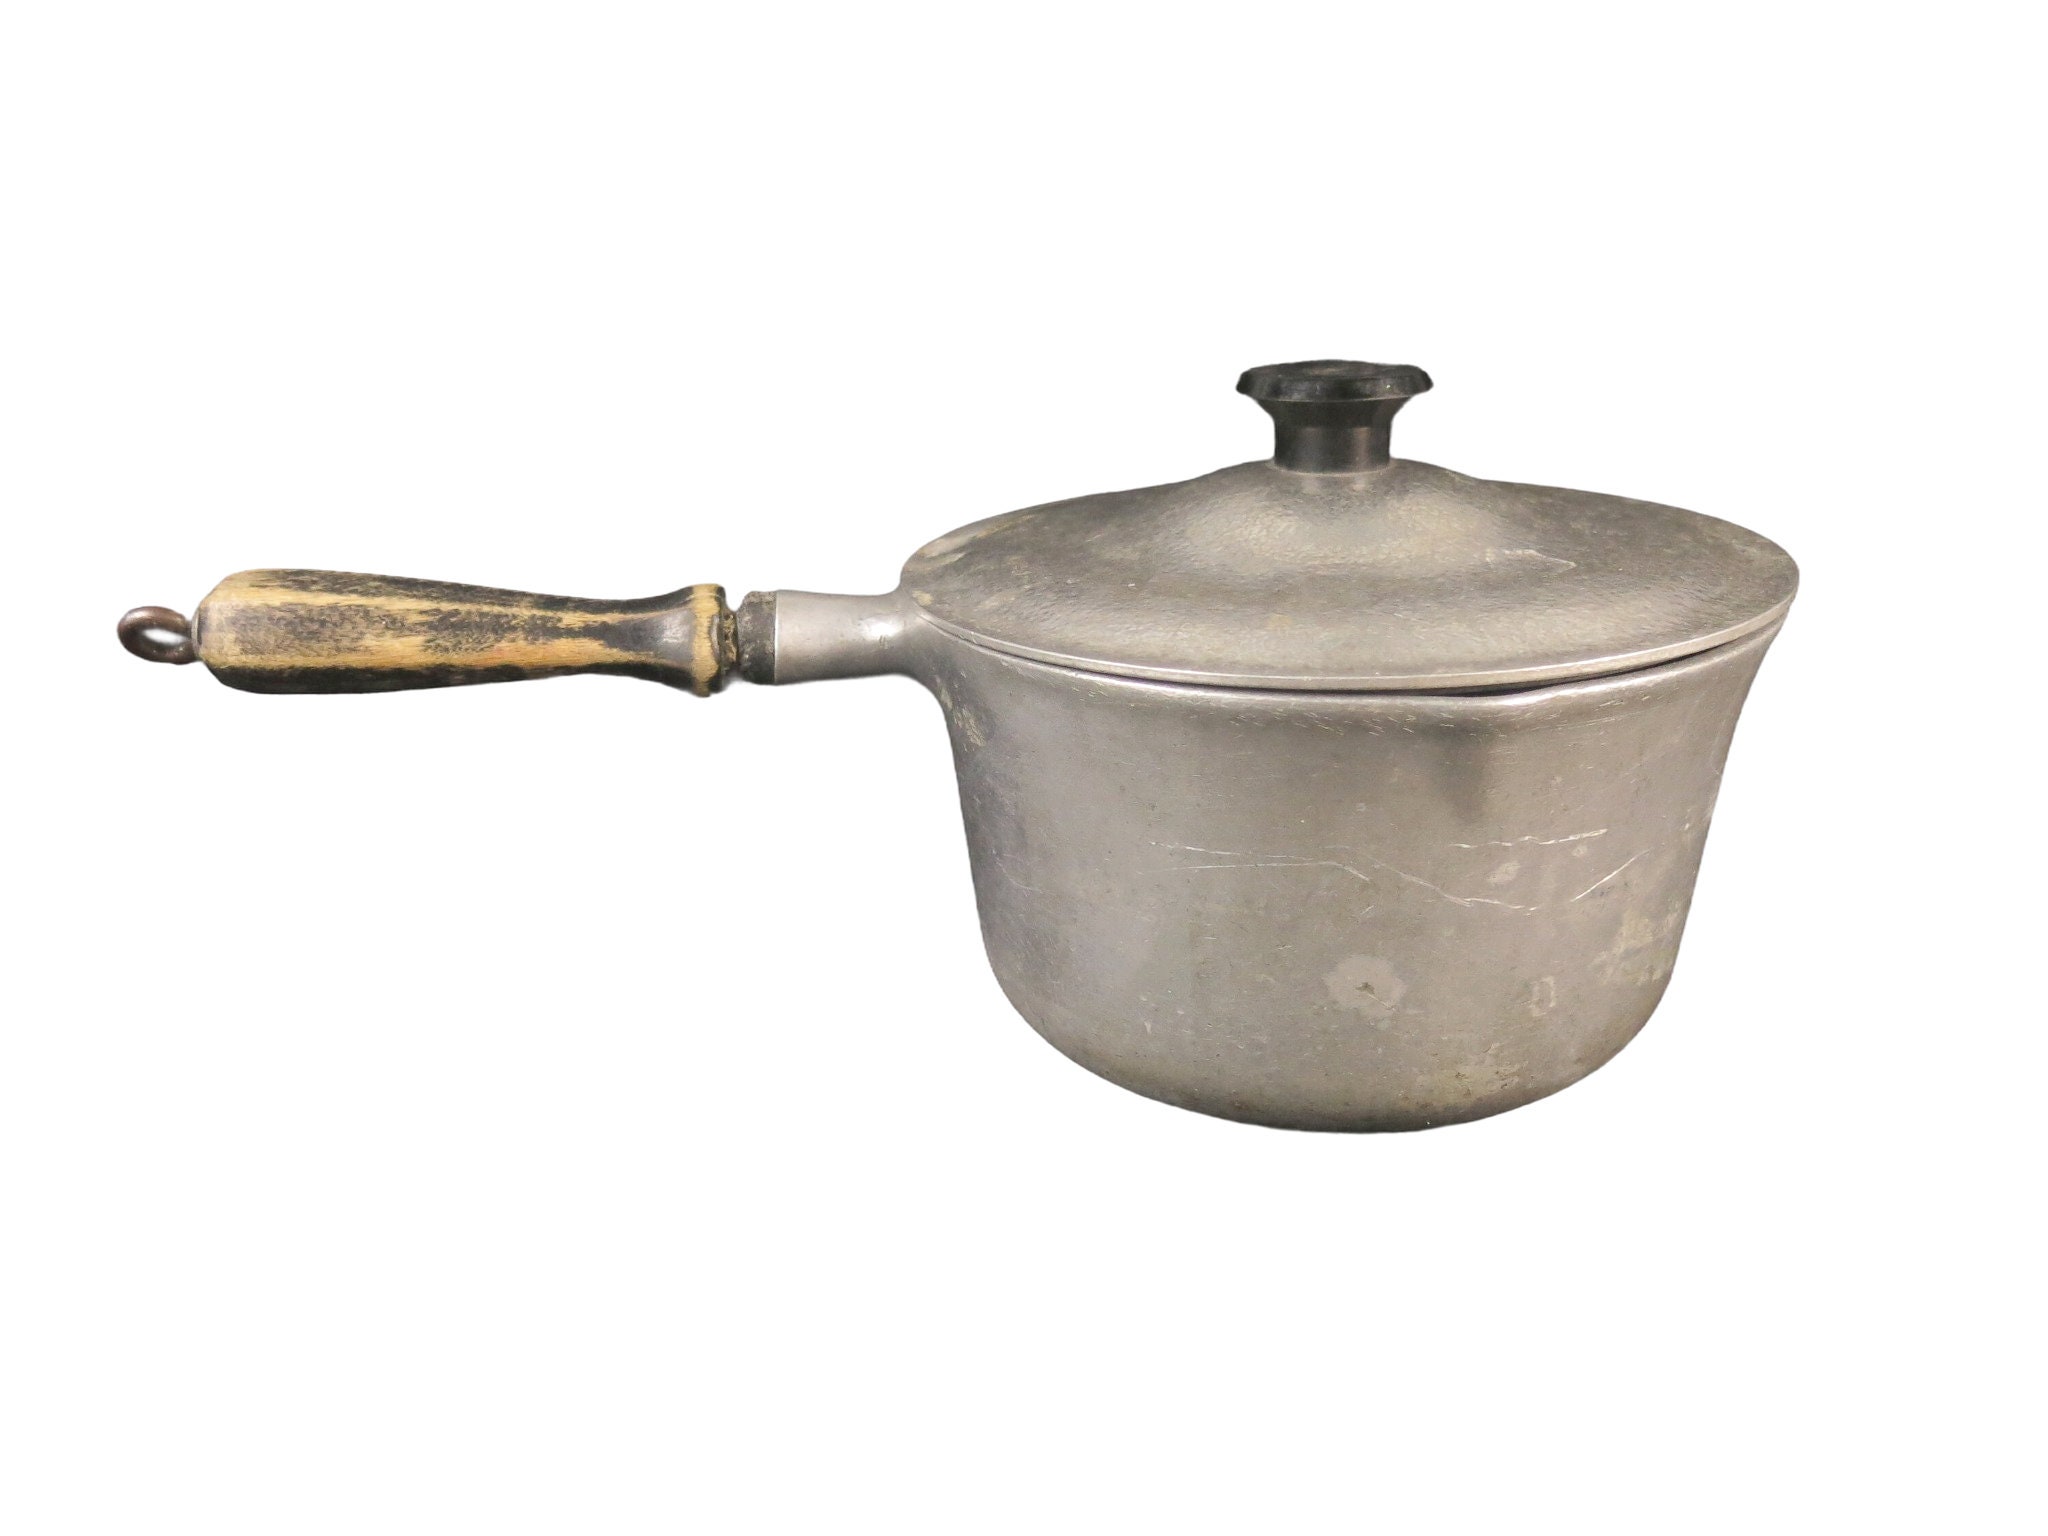 Antique Magnalite GHC (formerly Wagner Mfg. Co of Sydney O) Cast Aluminum  12QT Stock Pot with Lid, Bakelite Knob, Circa 1969, Made in U.S.A.